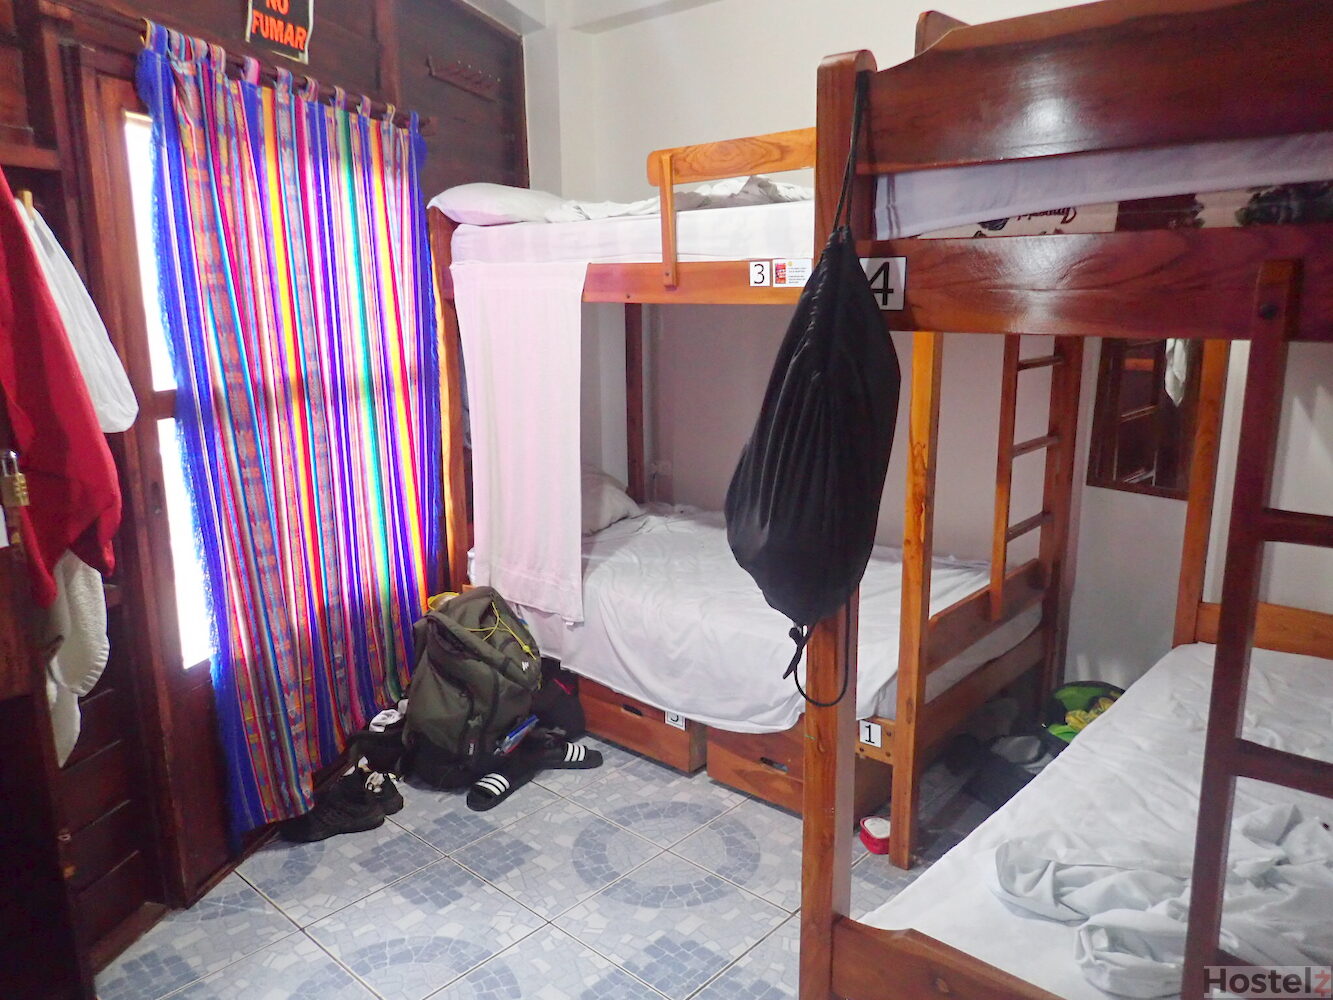 One of the four-bed dorms